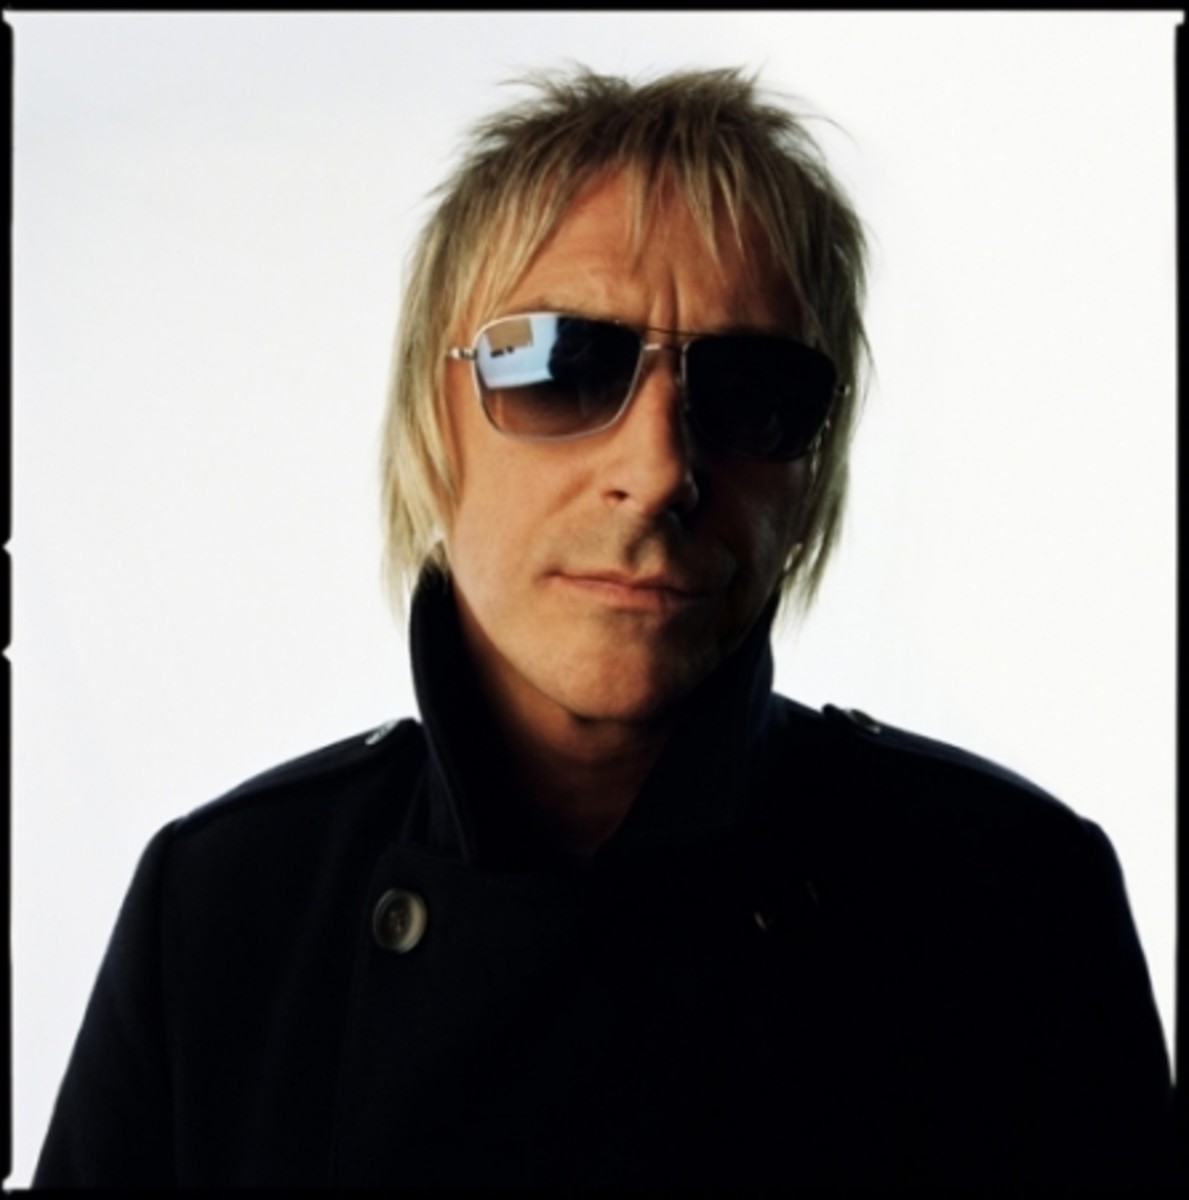 Paul Weller recently gave an interesting and somewhat humorous interview to XFM Manchester’s Clint Boon.